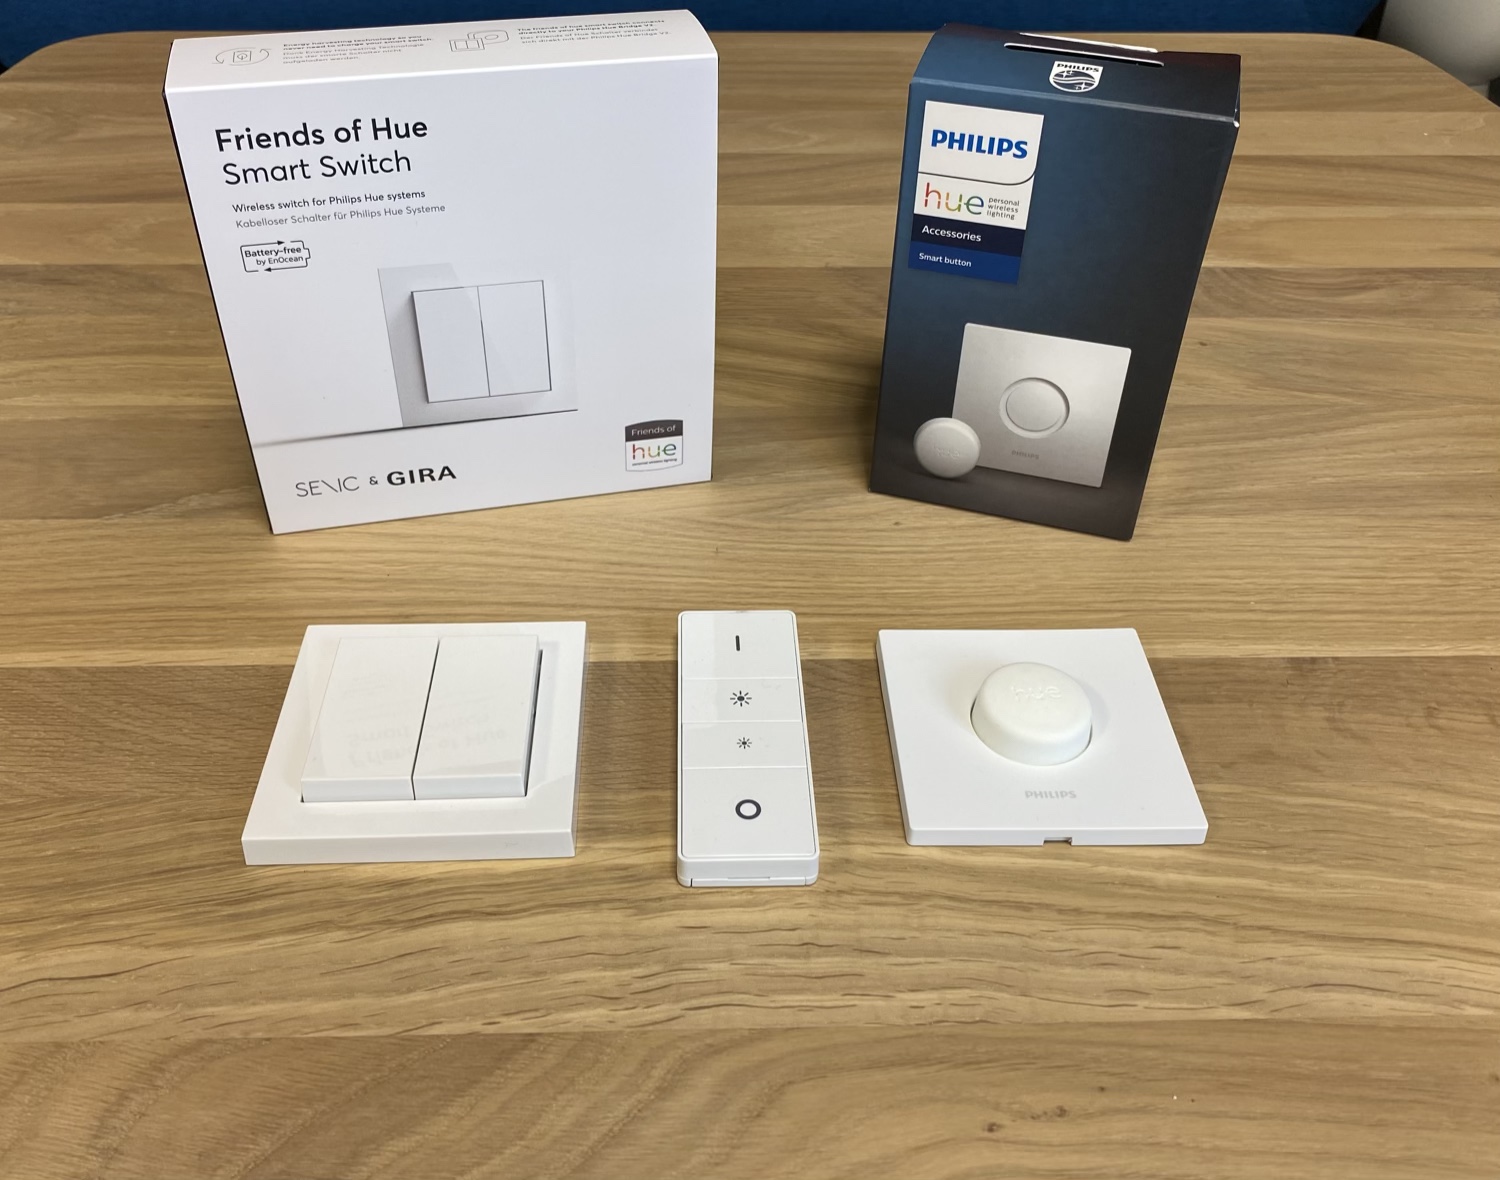 Hueblog: Dimmer switch, Smart Button or Friends of Hue: Which switch is the right one?